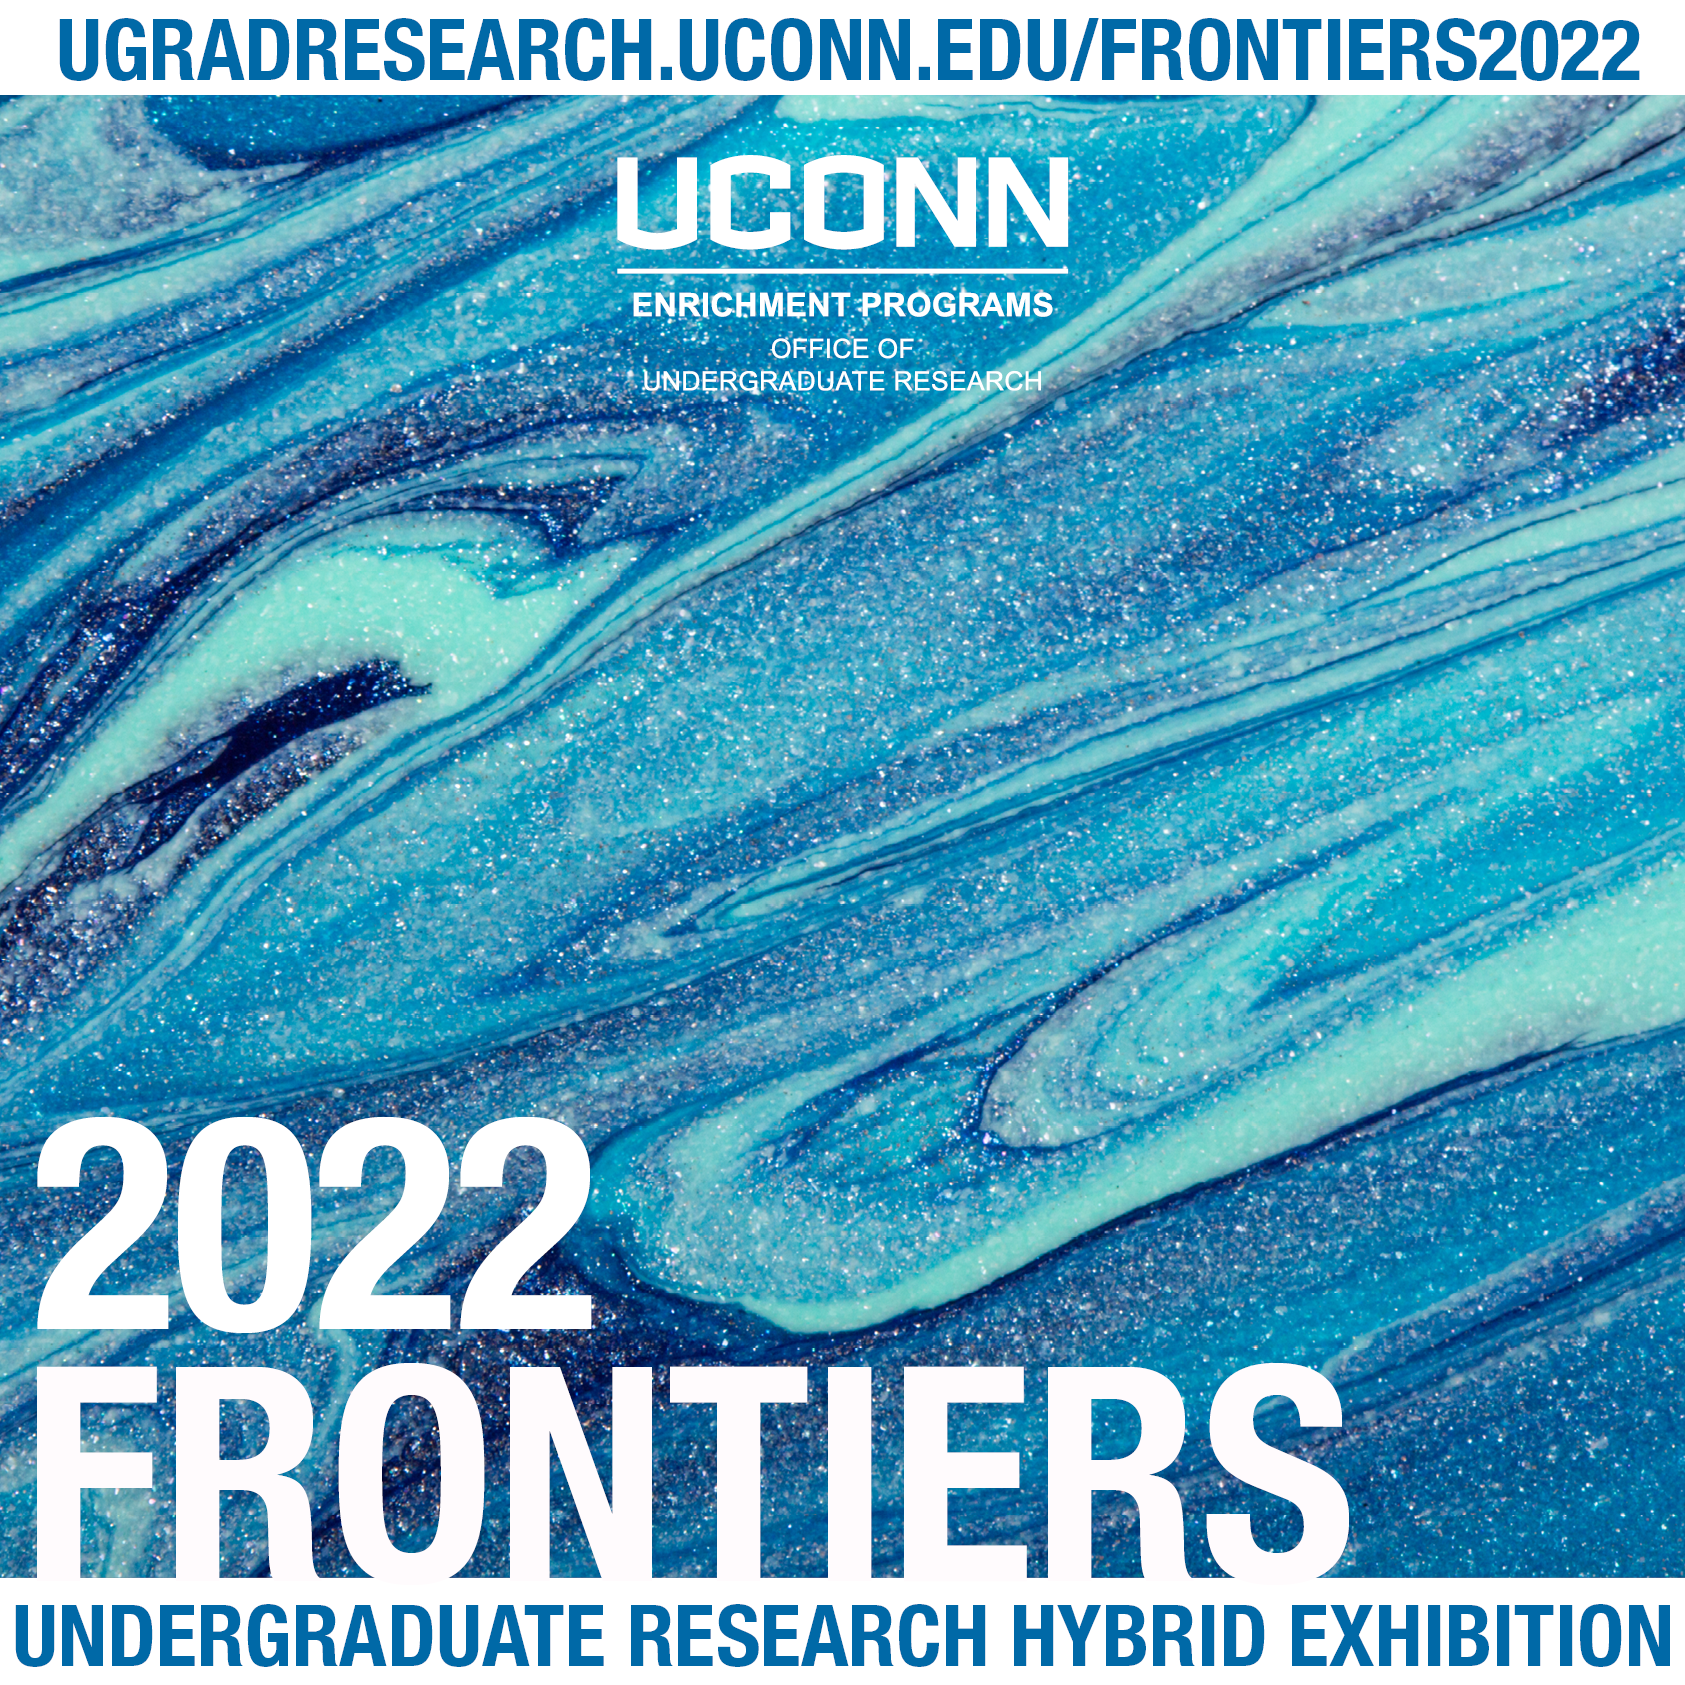 Over a blue and aqua marbled image, text reads, 2022 Frontiers Undergraduate Research Hybrid Exhibition. The image also lists the exhibition URL, ugradresearch.uconn.edu/frontiers2022